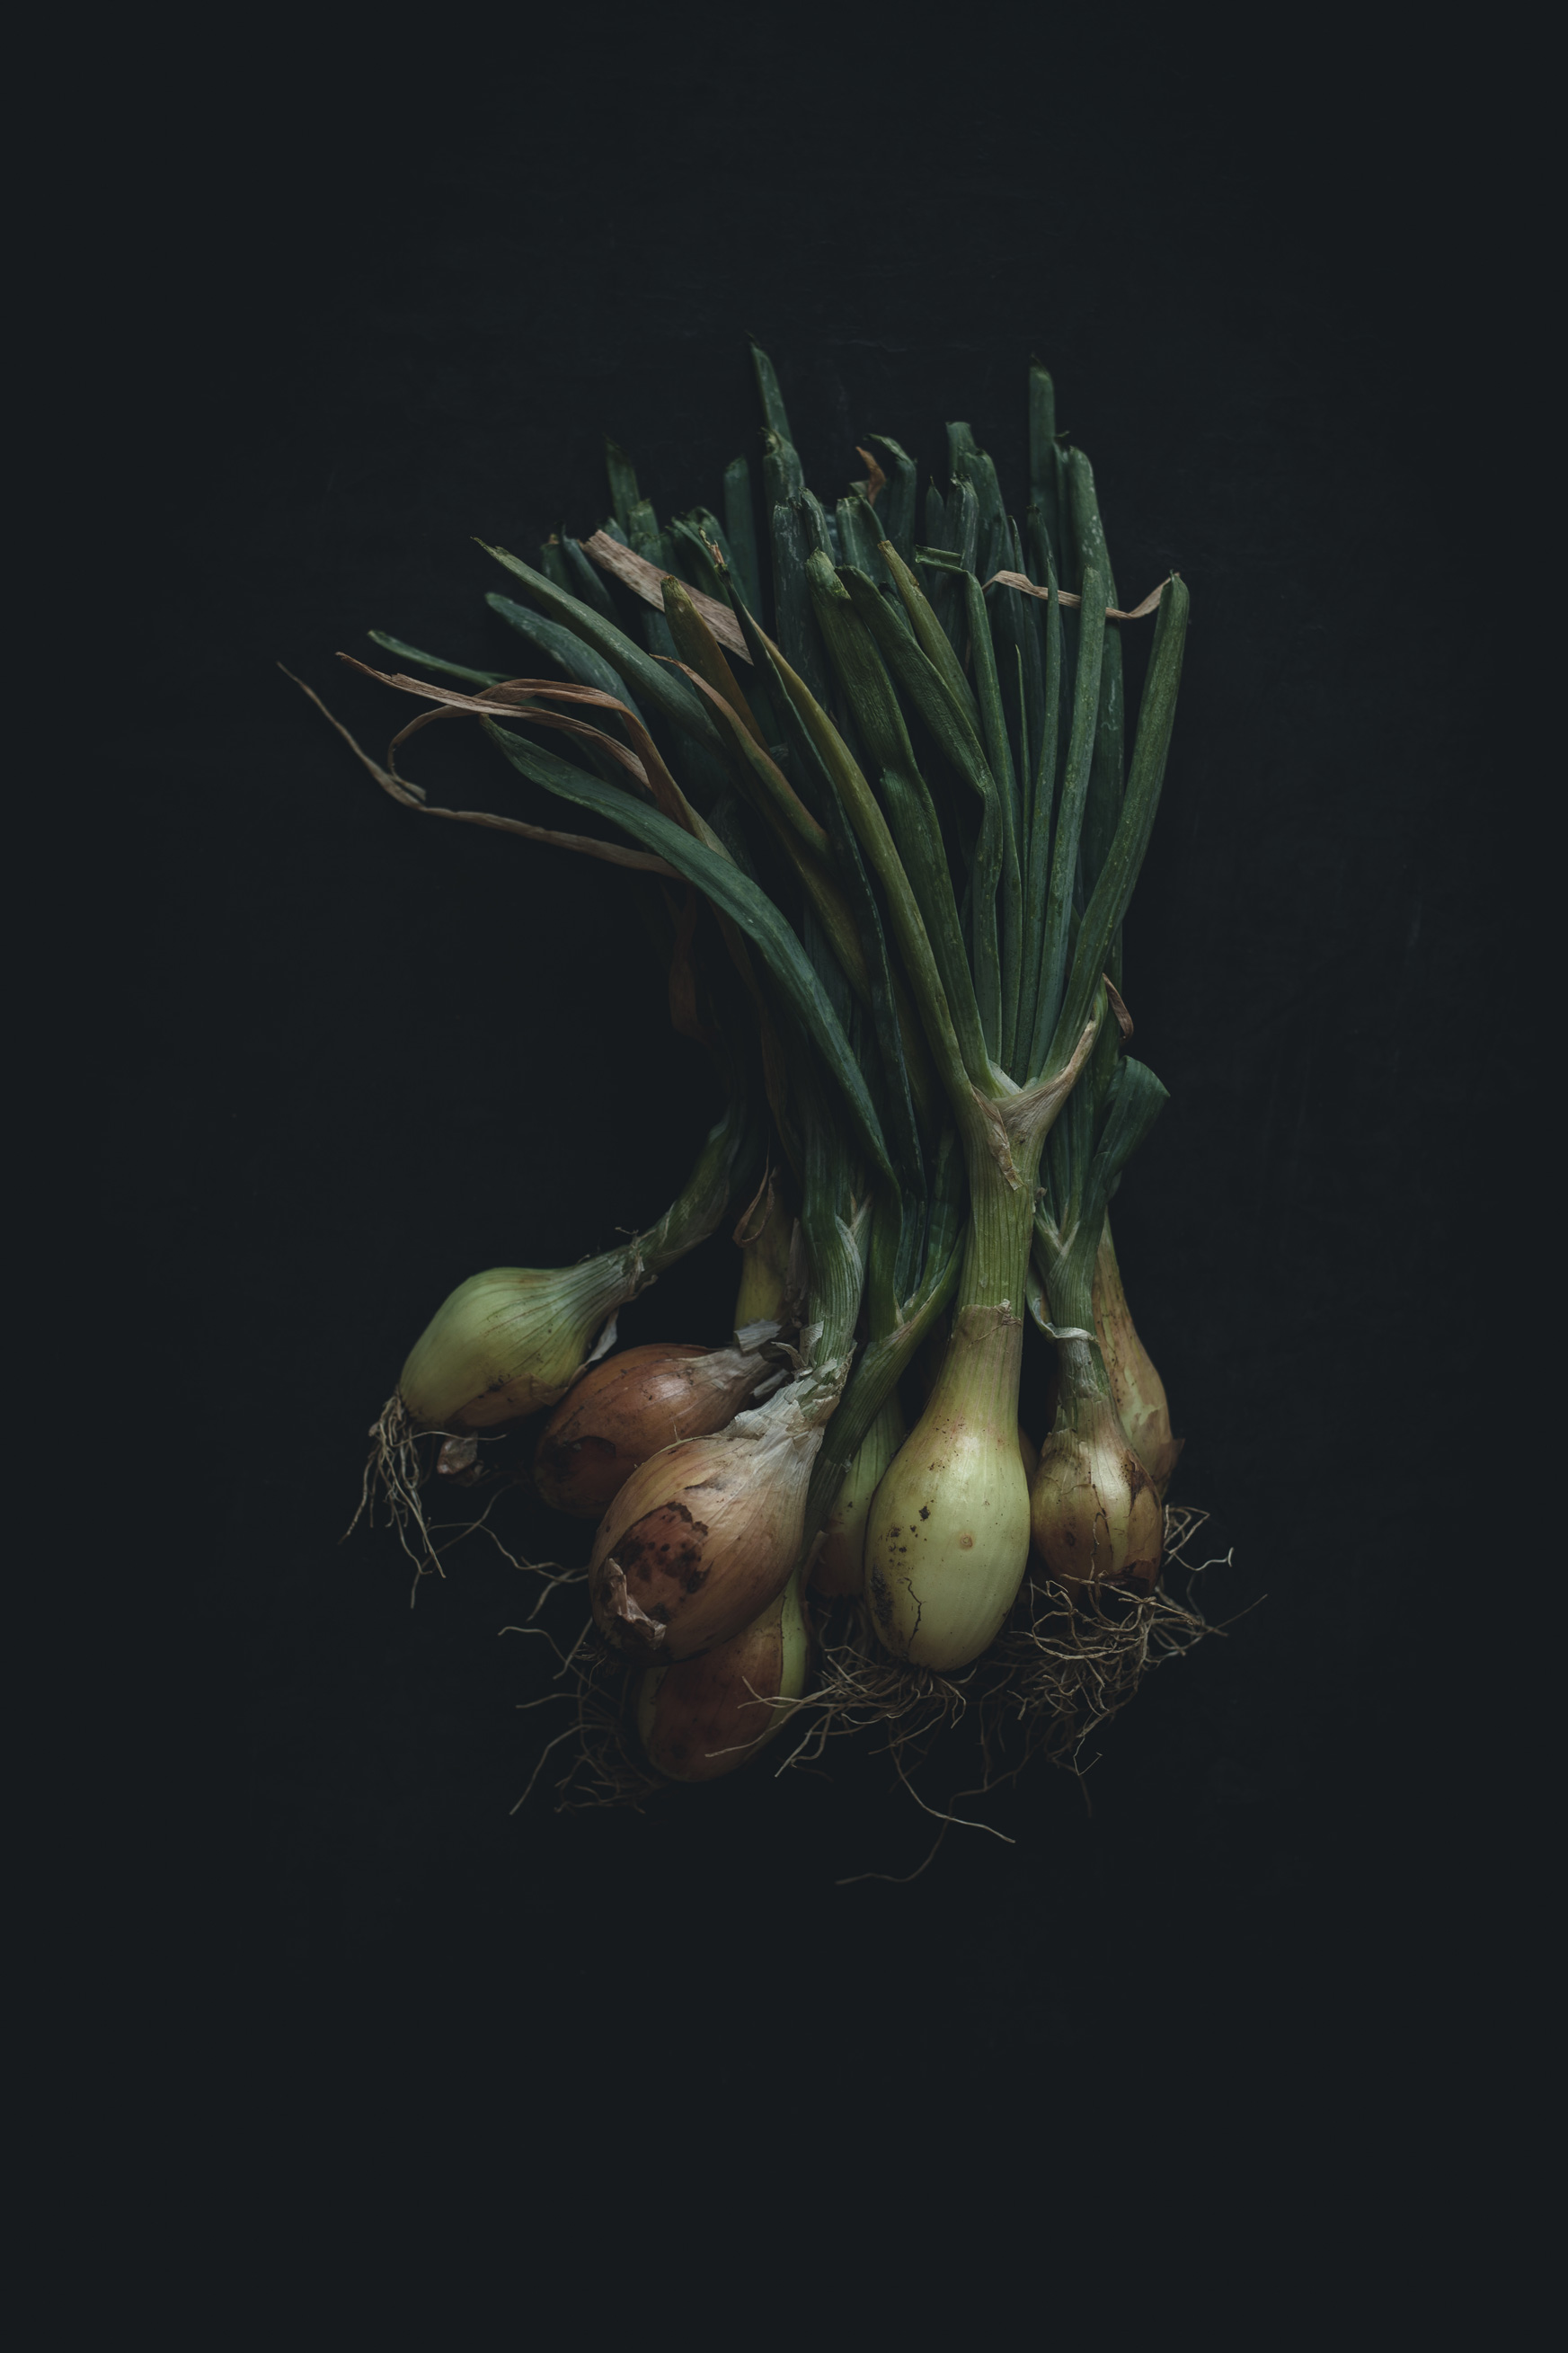 Onions on a black background from the Moody Food series by John Robson Photography